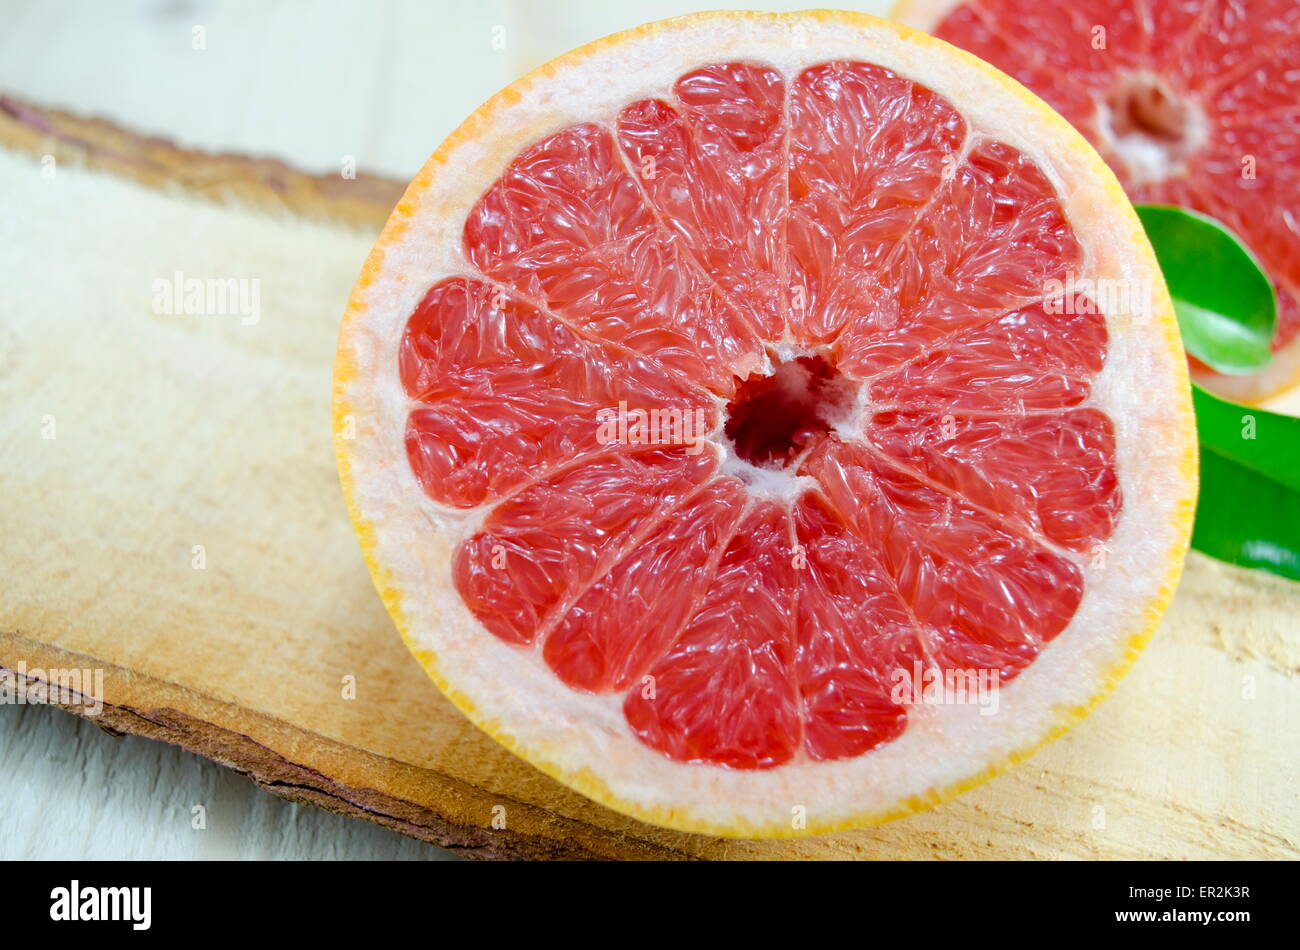 Fresh sliced grapefruit on a wooden board Stock Photo